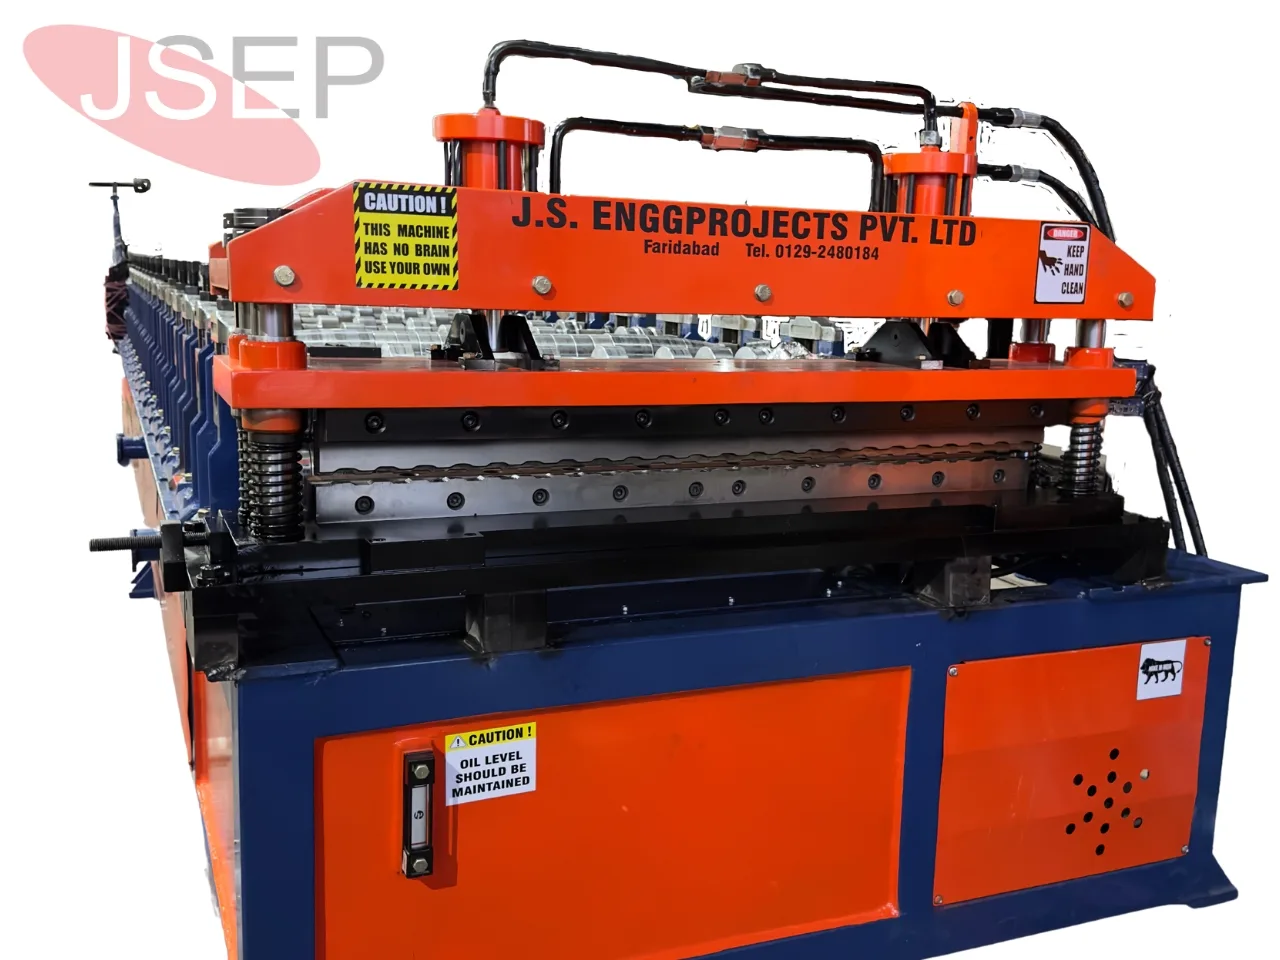 Liner Profile Roll Forming Machine in Haryana by J S ENGGPROJECTS